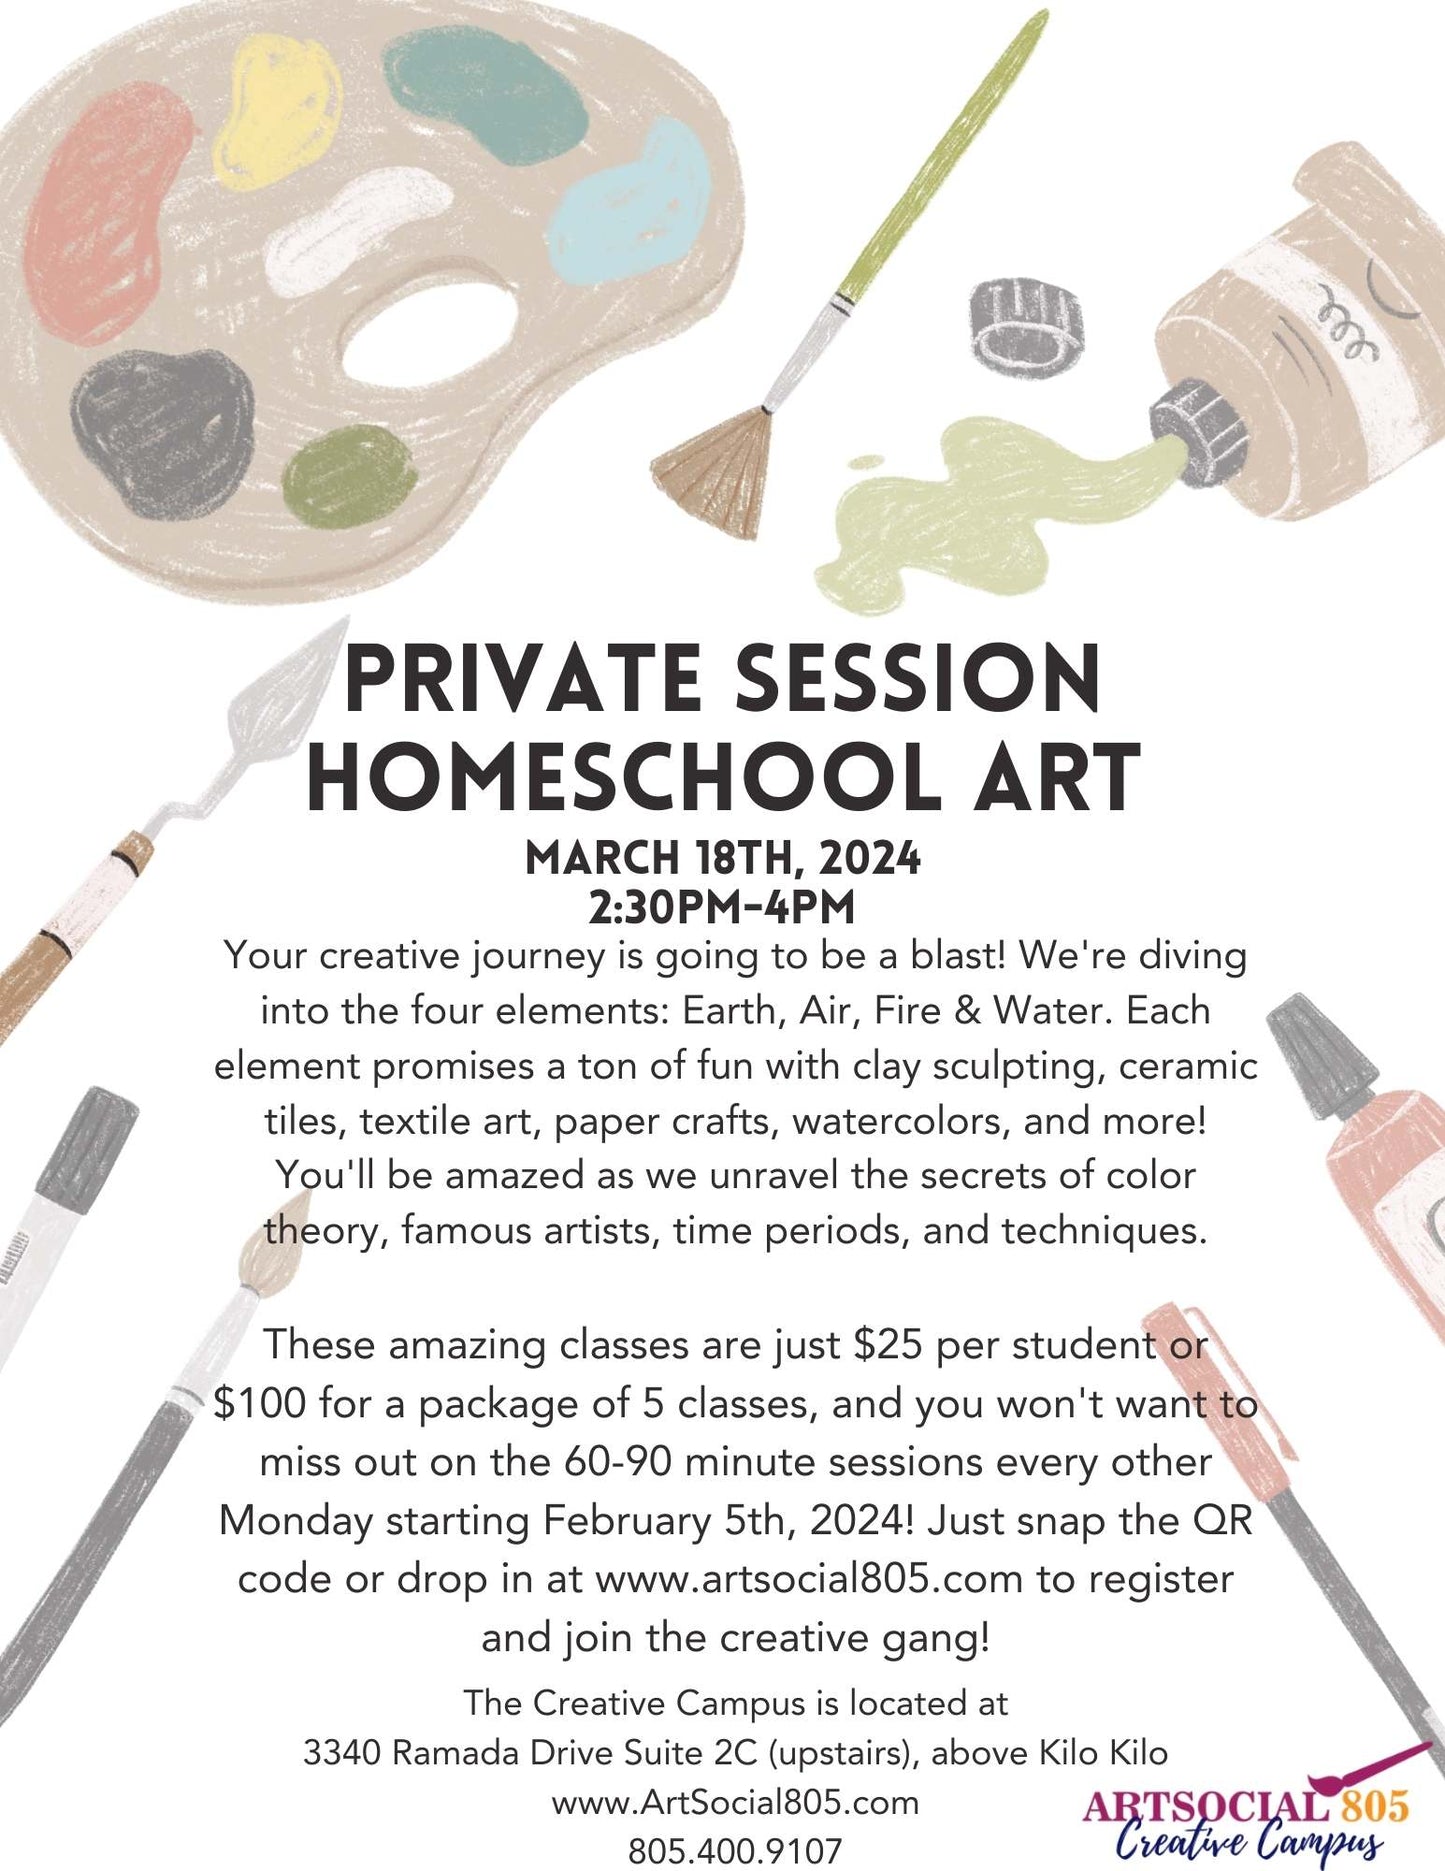 Private Home School Art Session At the ArtSocial 805 Creative Campus